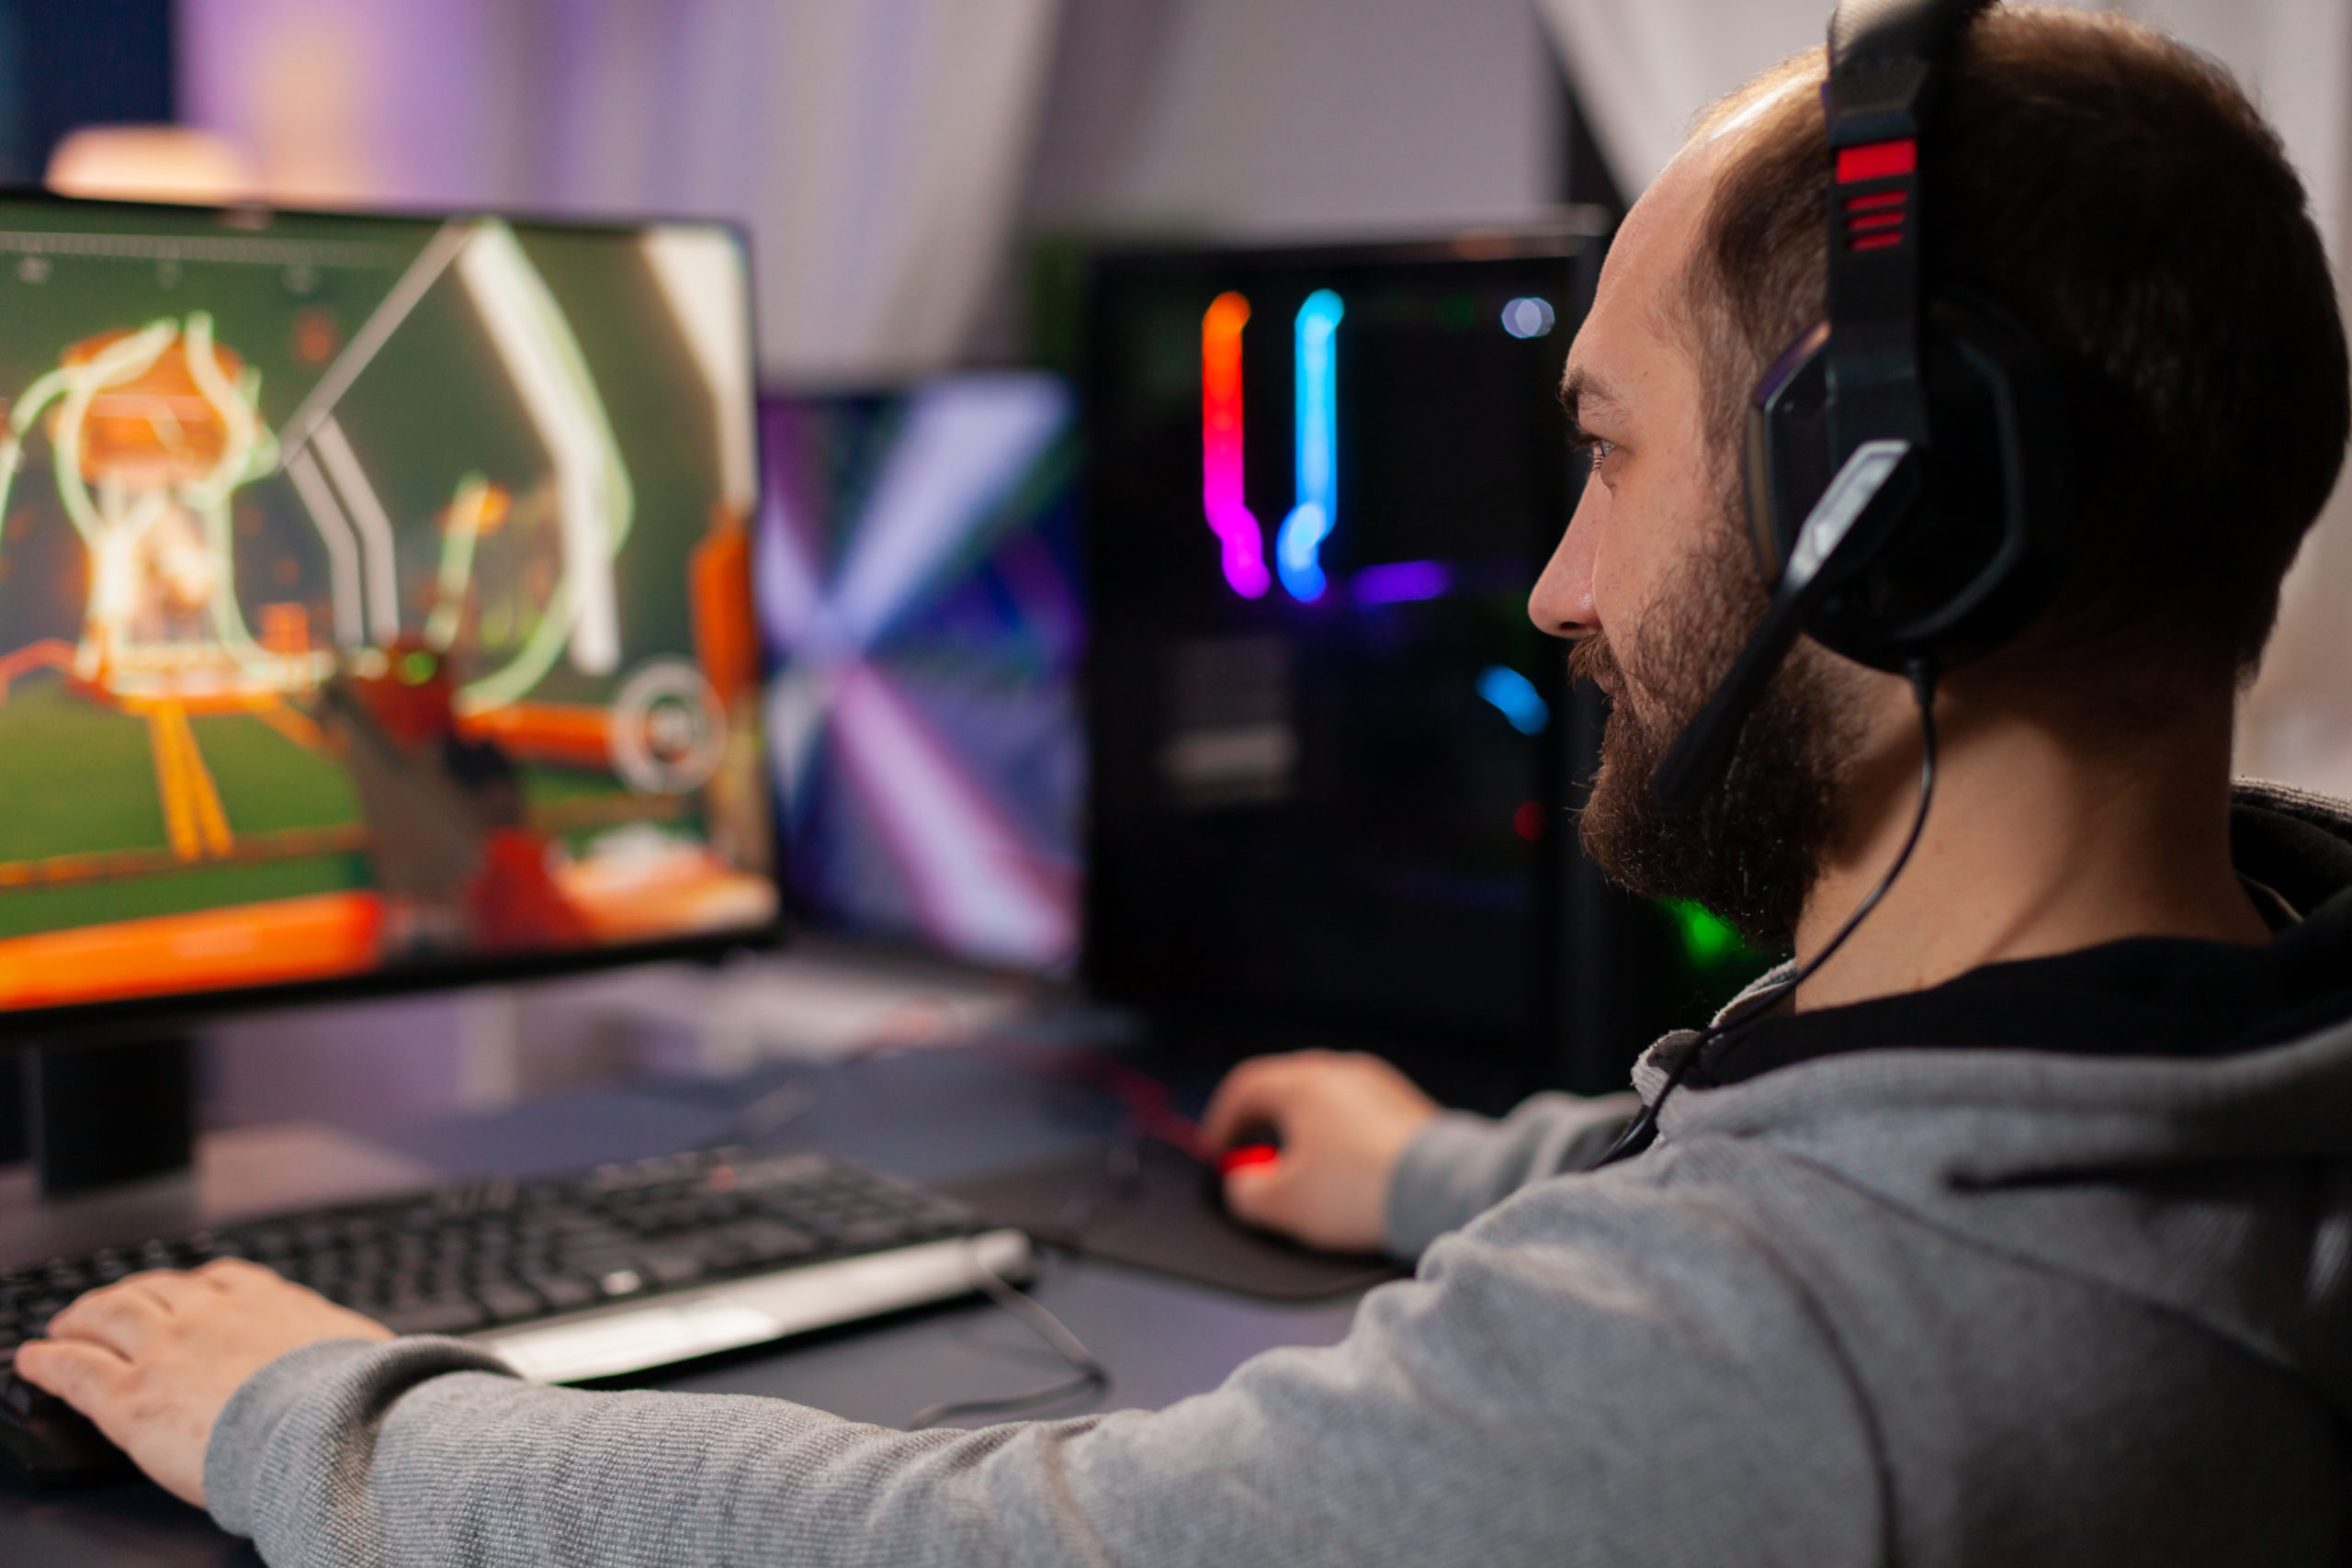 Digital player wearing headphones playing videogame with modern graphics for shooter game championship. Online streaming cyber performing during gaming tournament using powerful PC with RGB